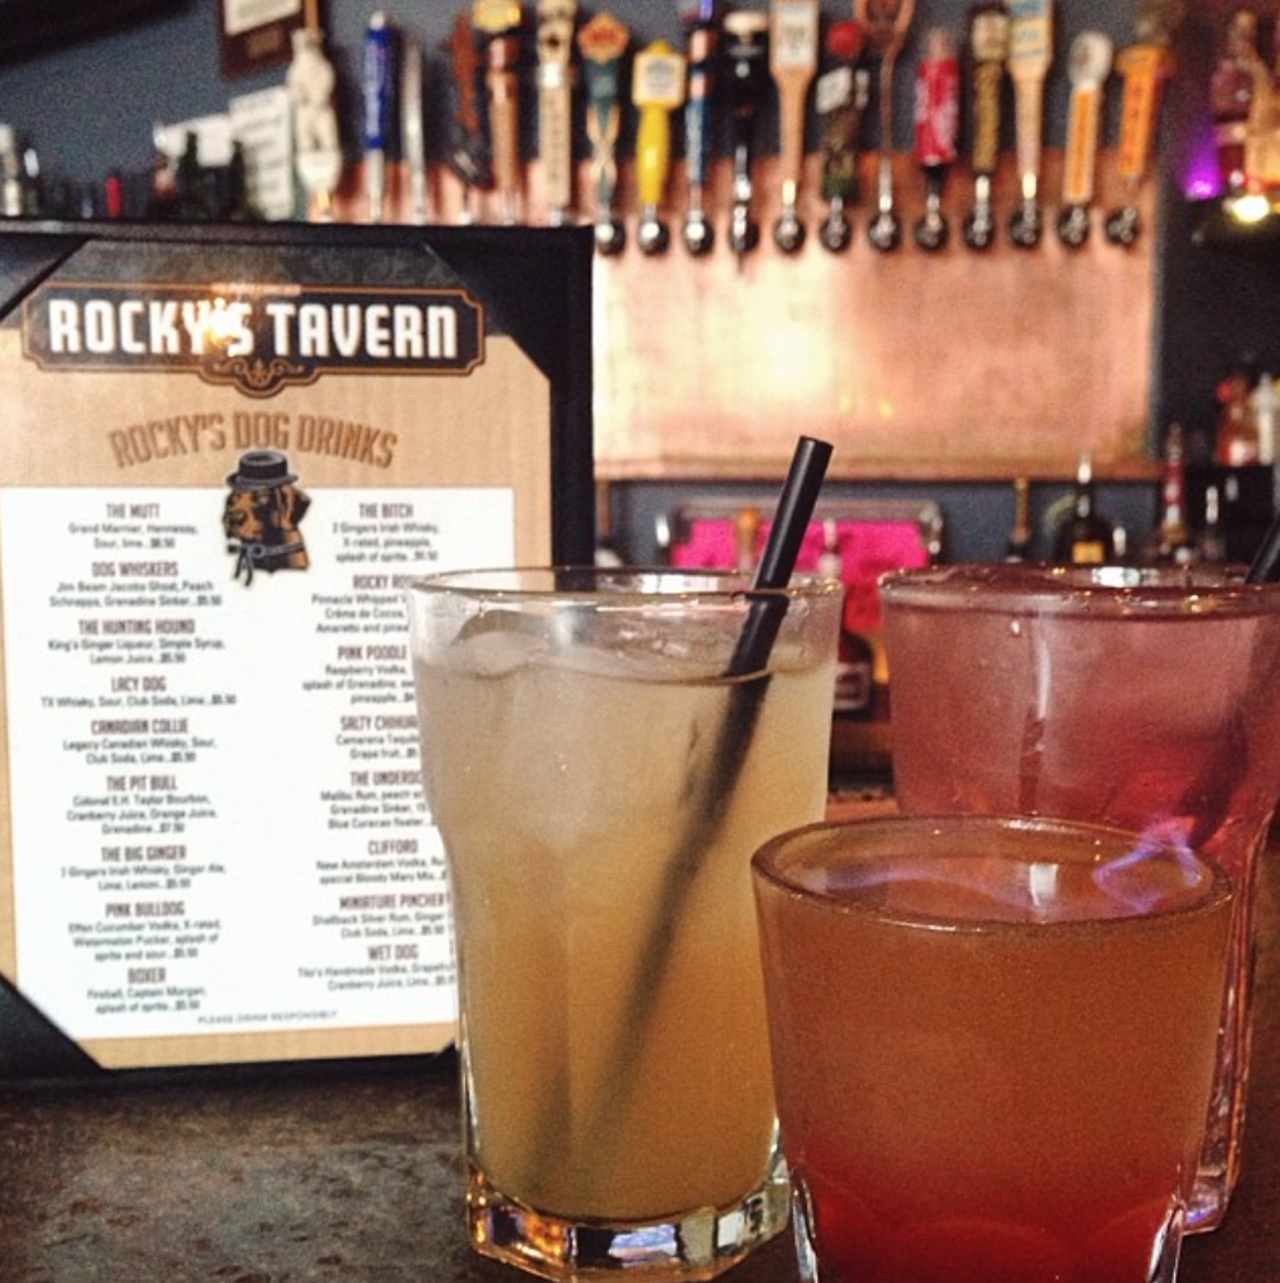 Rocky’s Tavern
This Northeast SA drinkery has a sweet outdoor patio, perfect for fresh air and cold beer. Enjoy TVs, pool and darts inside.11403 O’Connor Rd. Ste. 106, (210) 637-7625 https://www.instagram.com/rockystavern/.